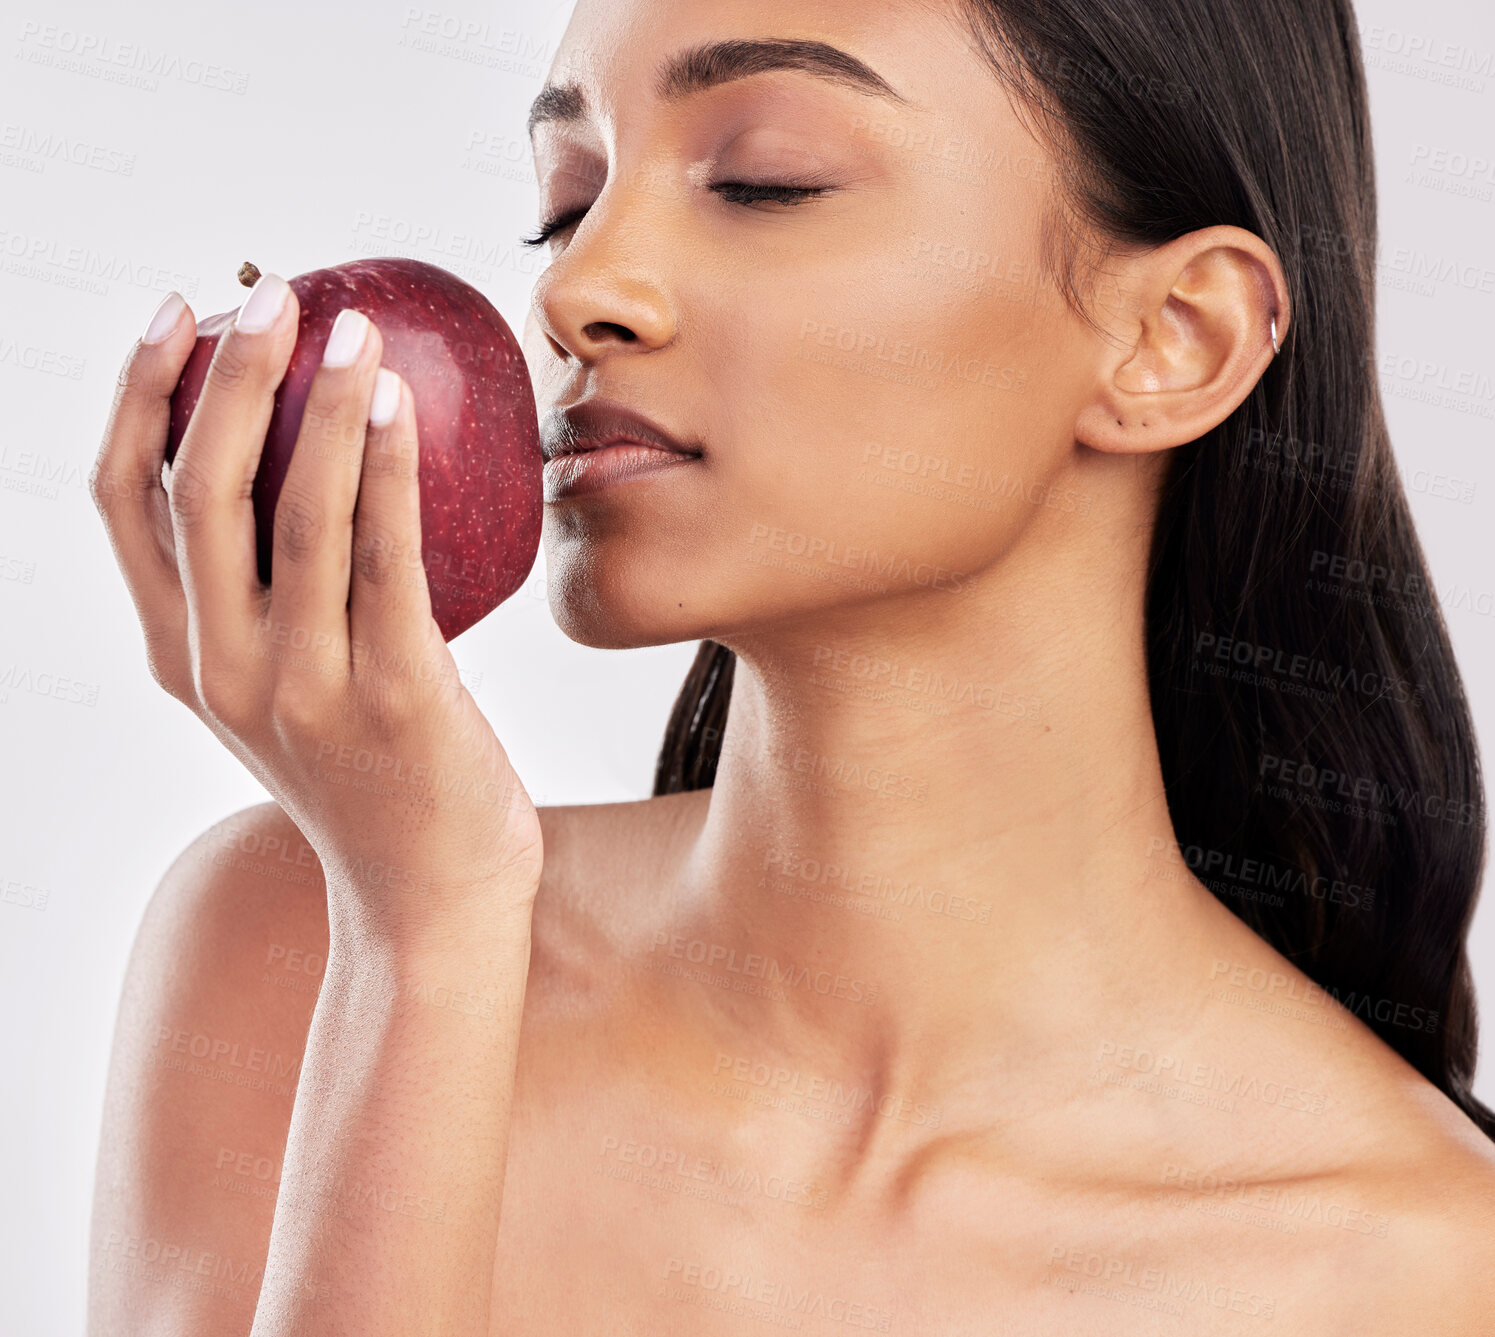 Buy stock photo Eating, apple or healthy Indian woman with skincare beauty or wellness in studio on white background. Food nutrition, eyes closed or face of girl model with red fruits to promote vitamin c or diet